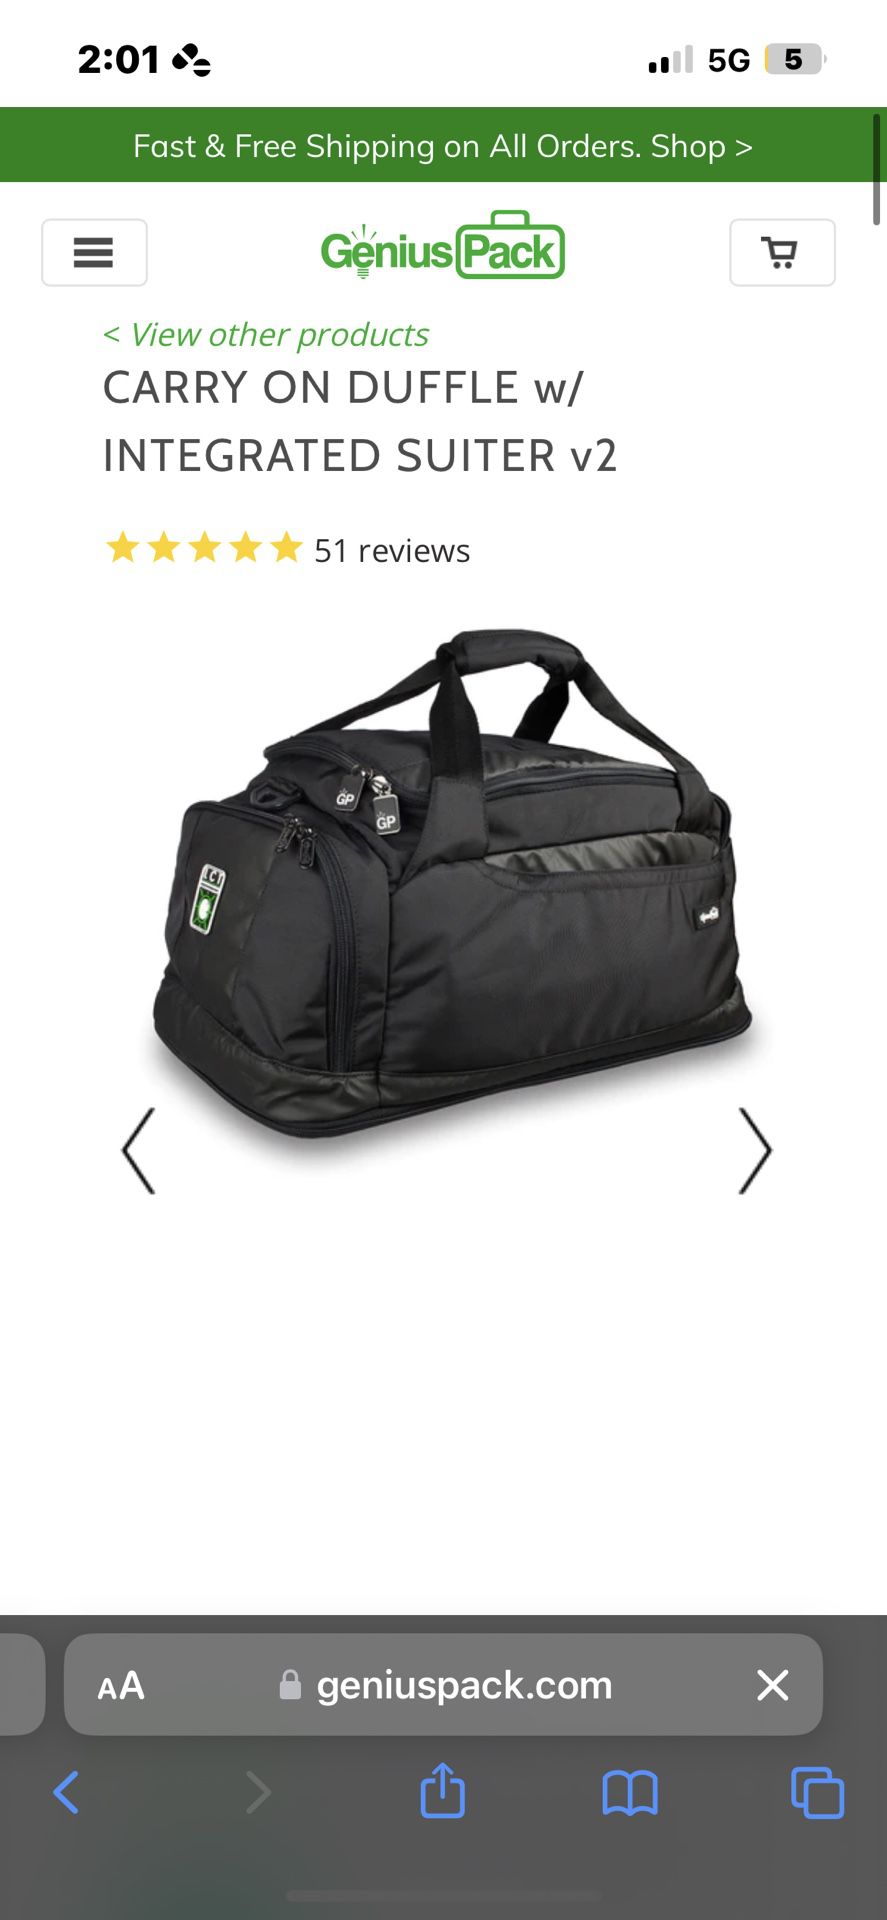 laundry compression technology duffle bag